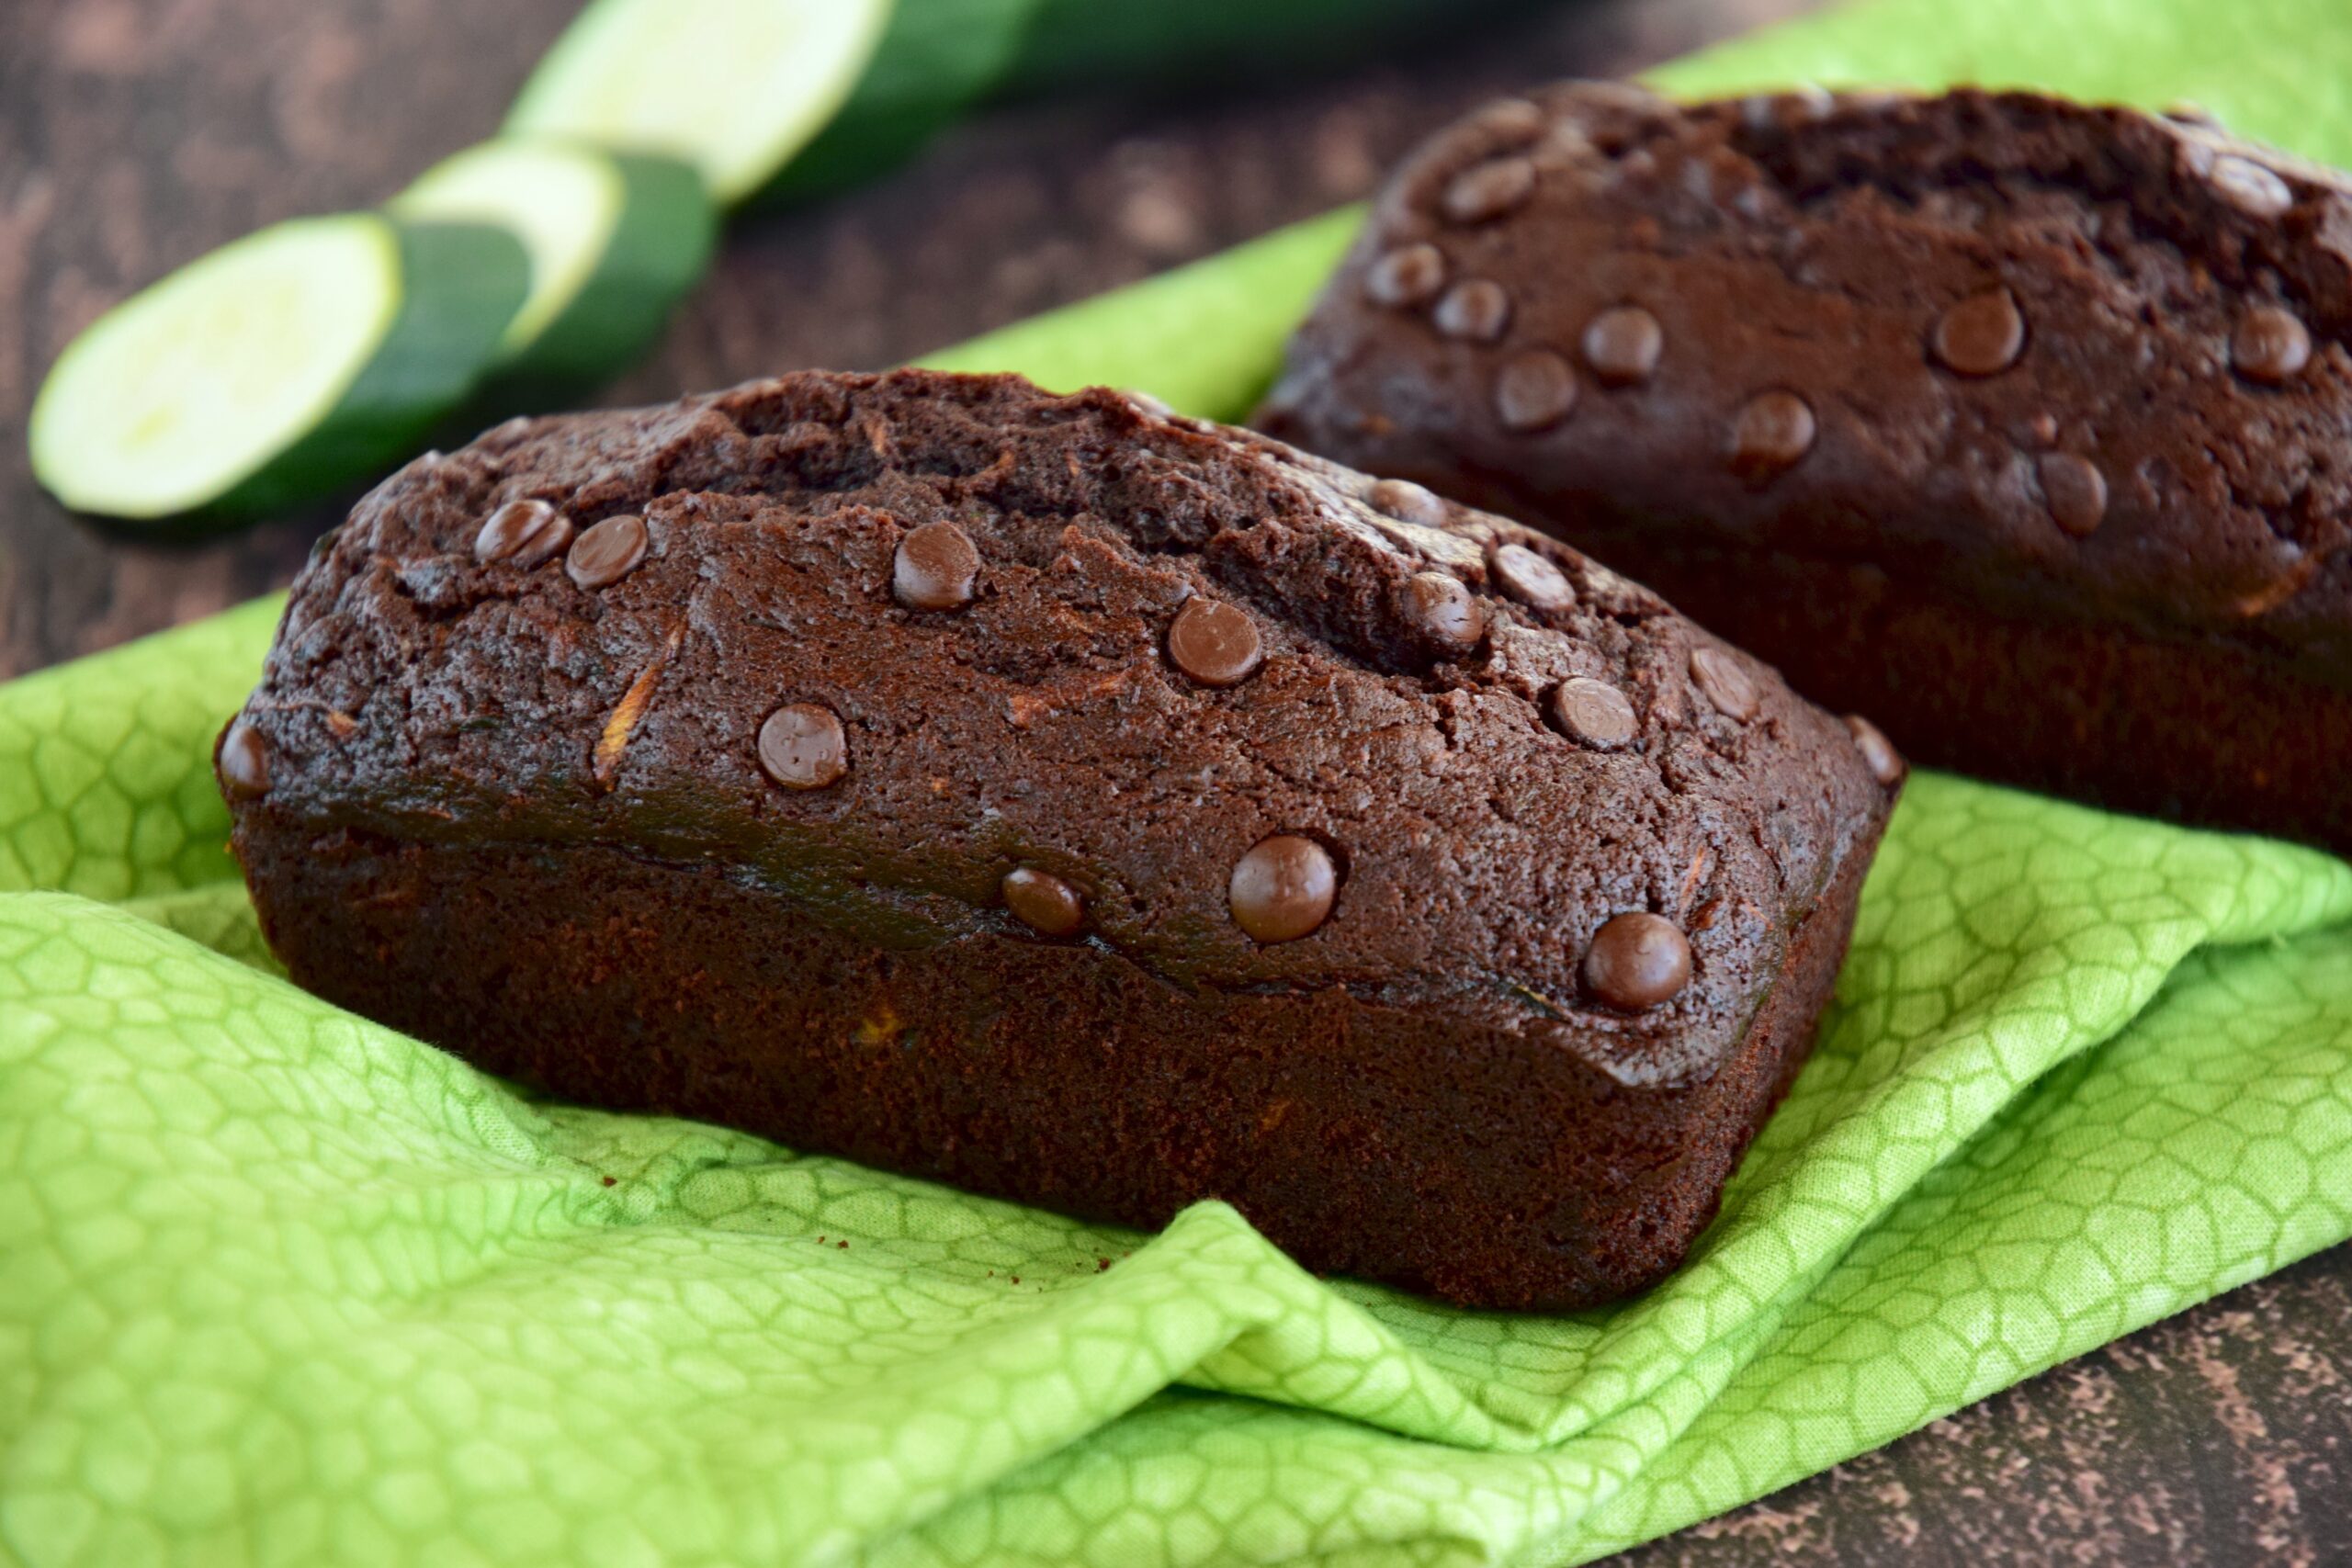 Make guilt-free dark chocolate zucchini bread in the blender. It's a wholesome delight, sweetened with maple syrup & dates. Try it!